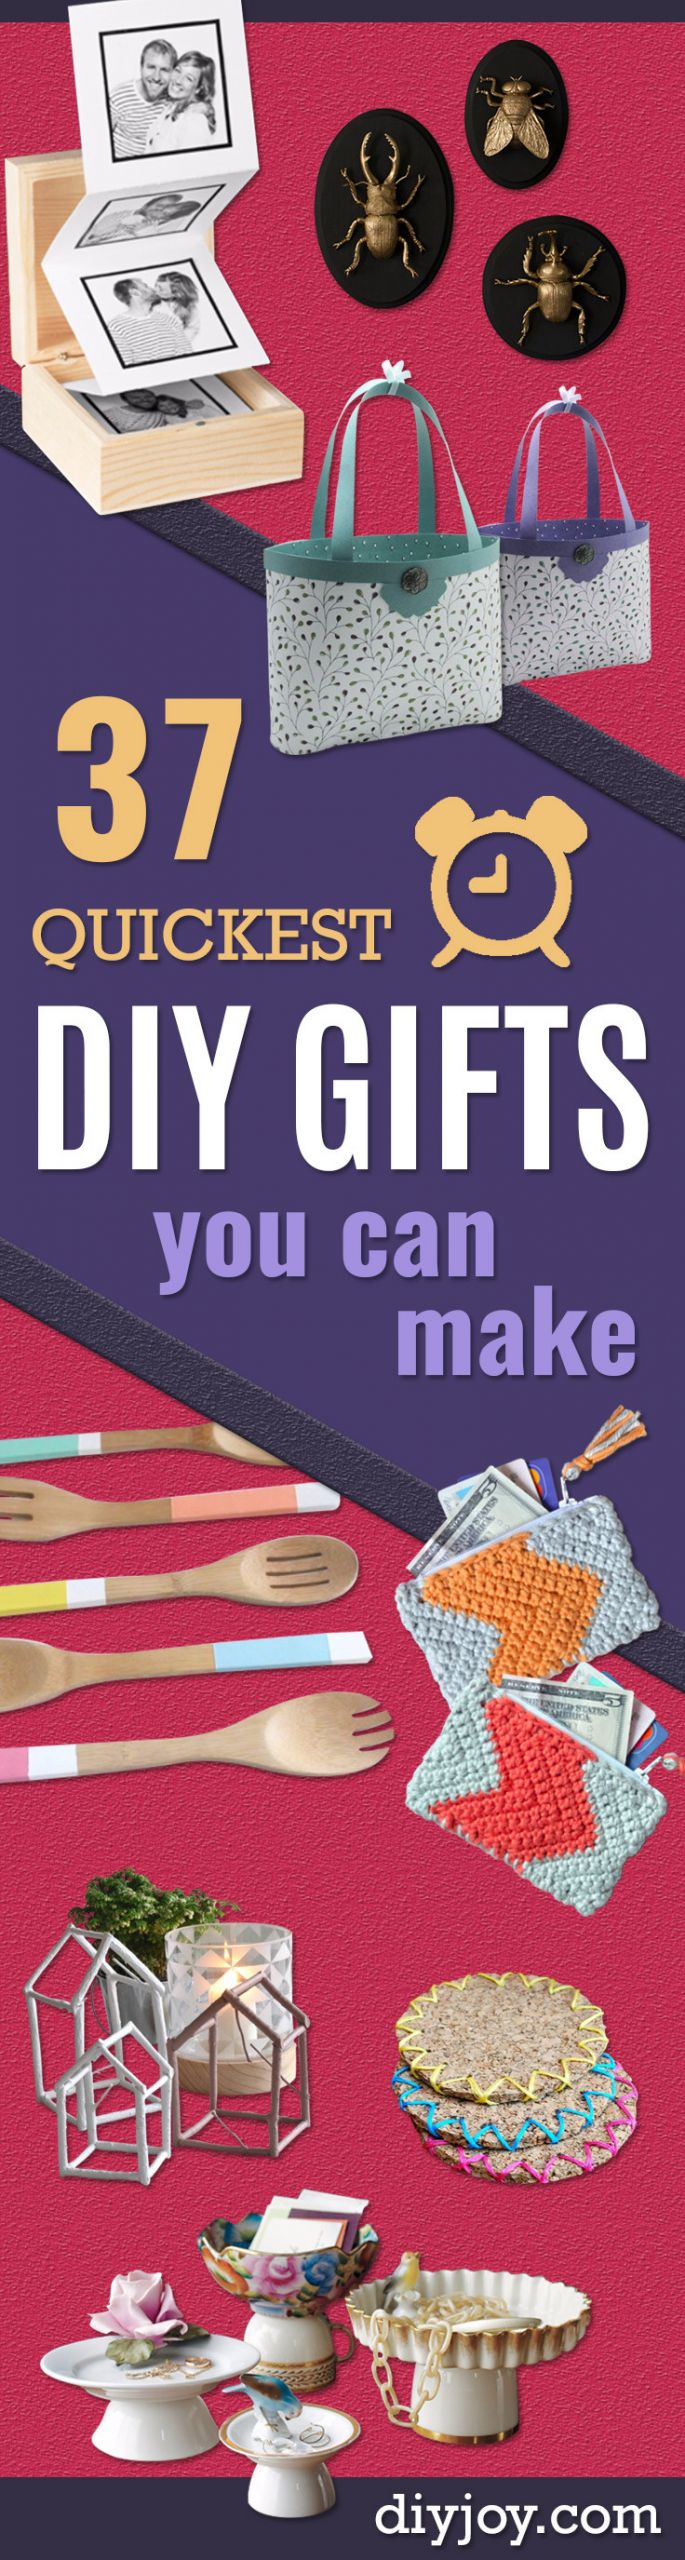 Quick DIY Gifts
 37 Quickest DIY Gifts You Can Make